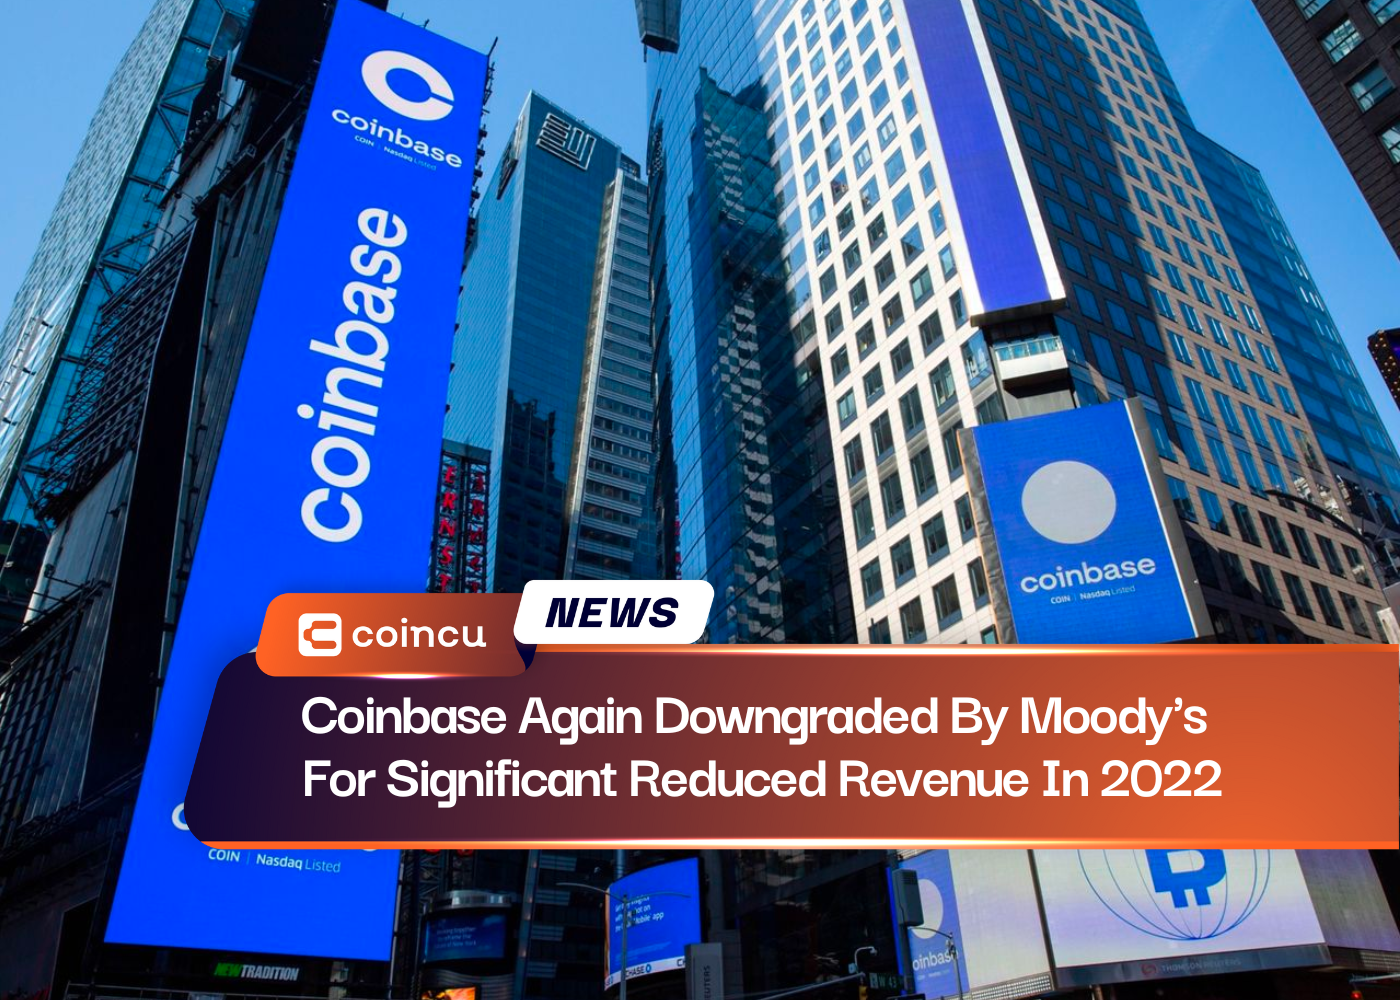 Coinbase Again Downgraded By Moody's For Significant Reduced Revenue In 2022